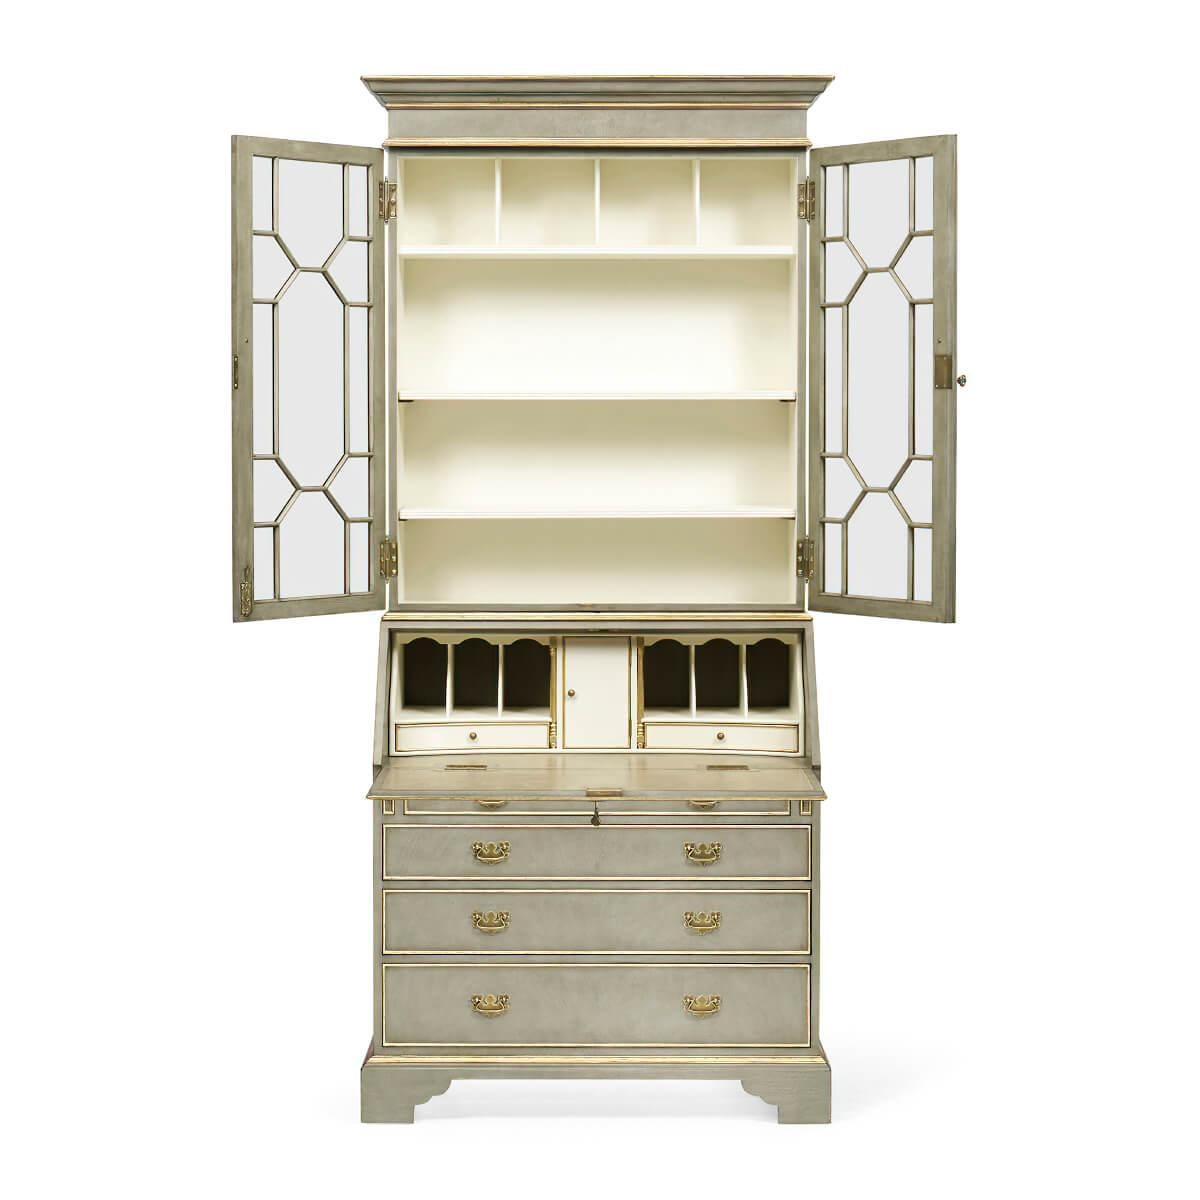 Elegant Georgian style antiqued grey painted and gilt highlighted secretary bookcase with classical pediment, geometric glazing bars over the twin doors with three adjustable shelves within, the lower section with a fall front, fully lined curved